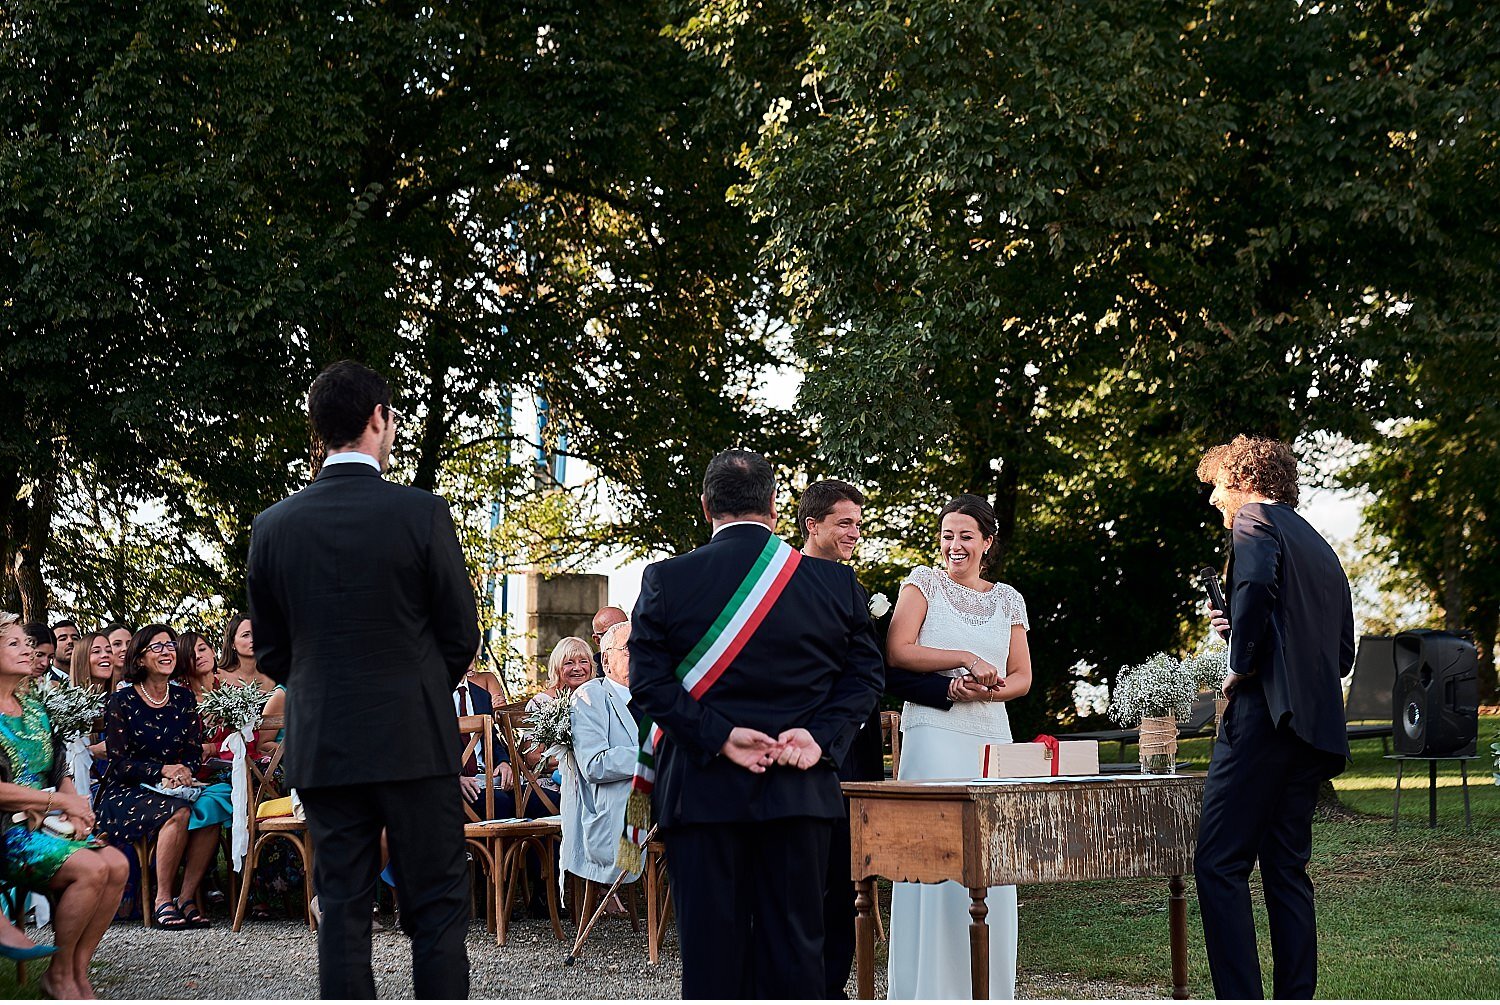  Italo-Hispanic wedding in the heart of Chianti, in the splendid village of Pietrafitta, between Siena and Florence. A symbolic ceremony in the garden with a spectacular view of the surrounding landscape. Reception with typical Tuscan menu and local 